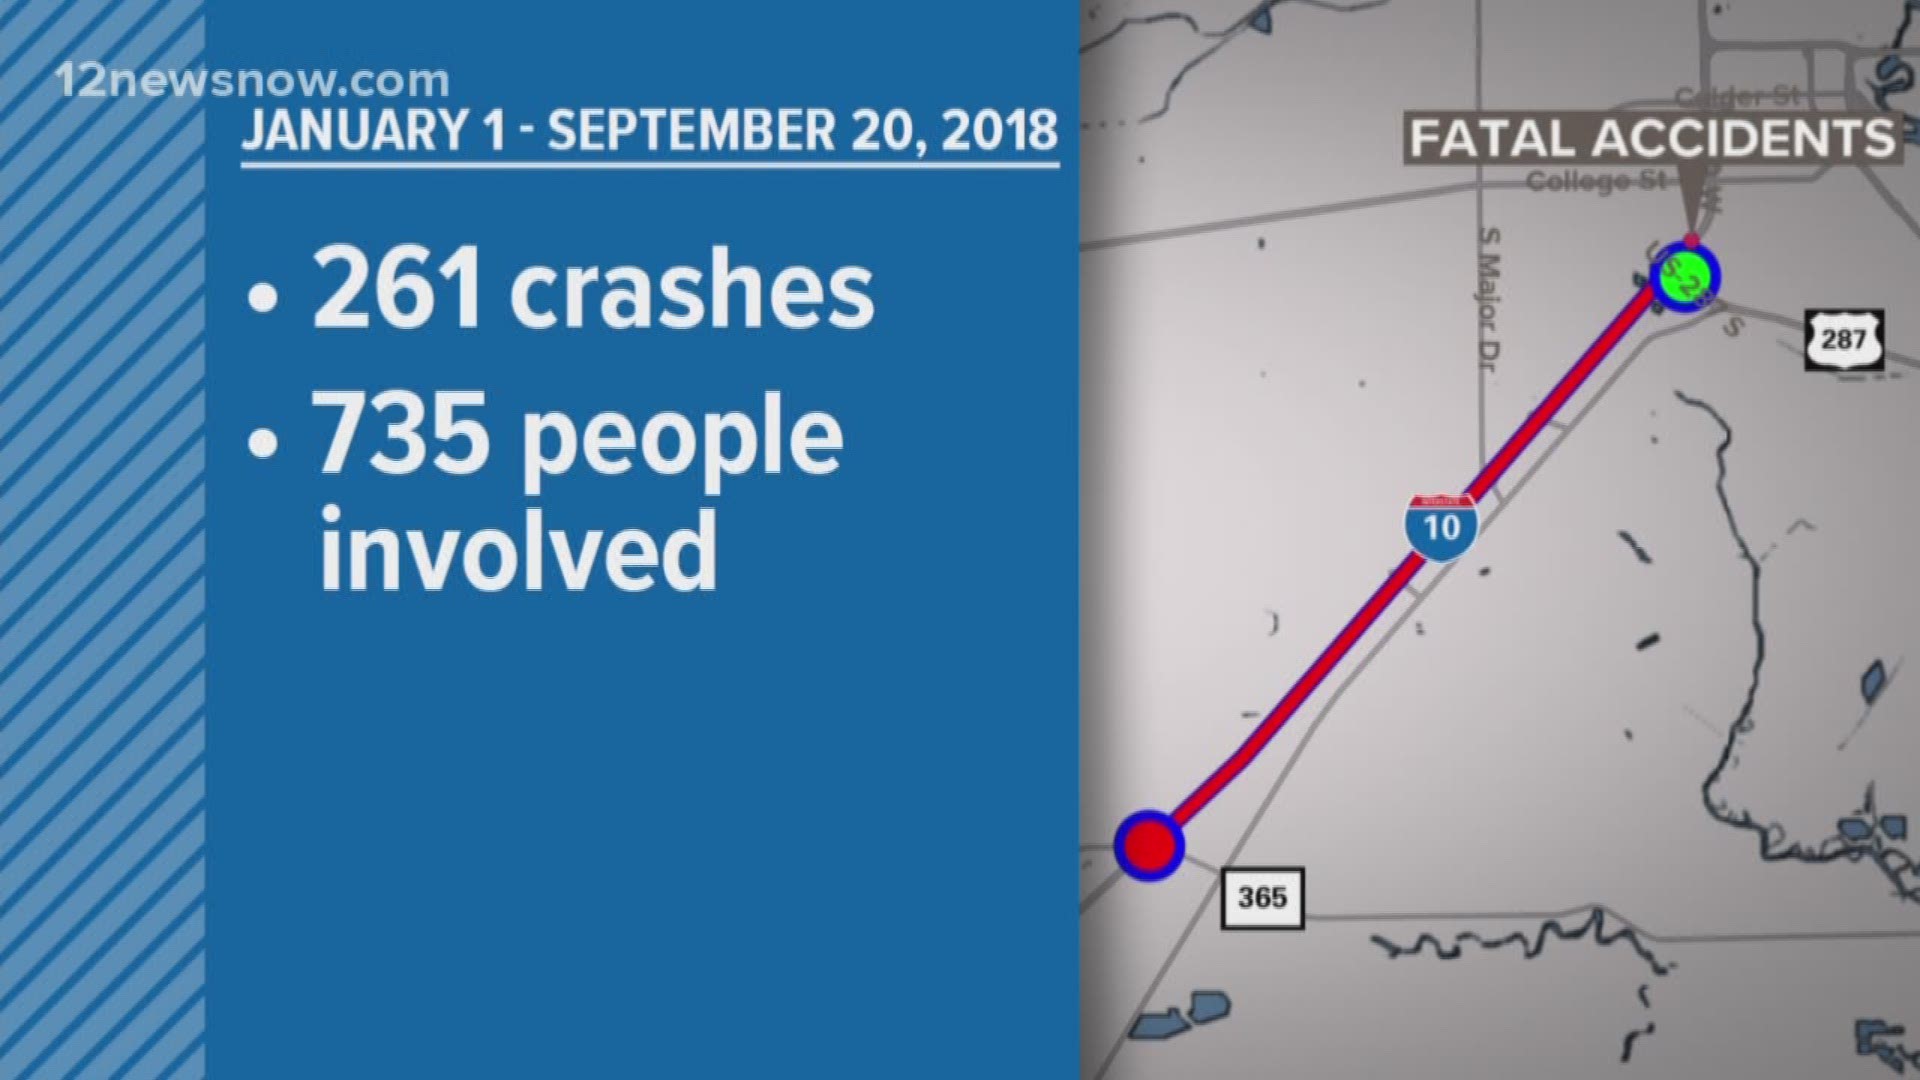 5 people died Thursday in 2 crashes